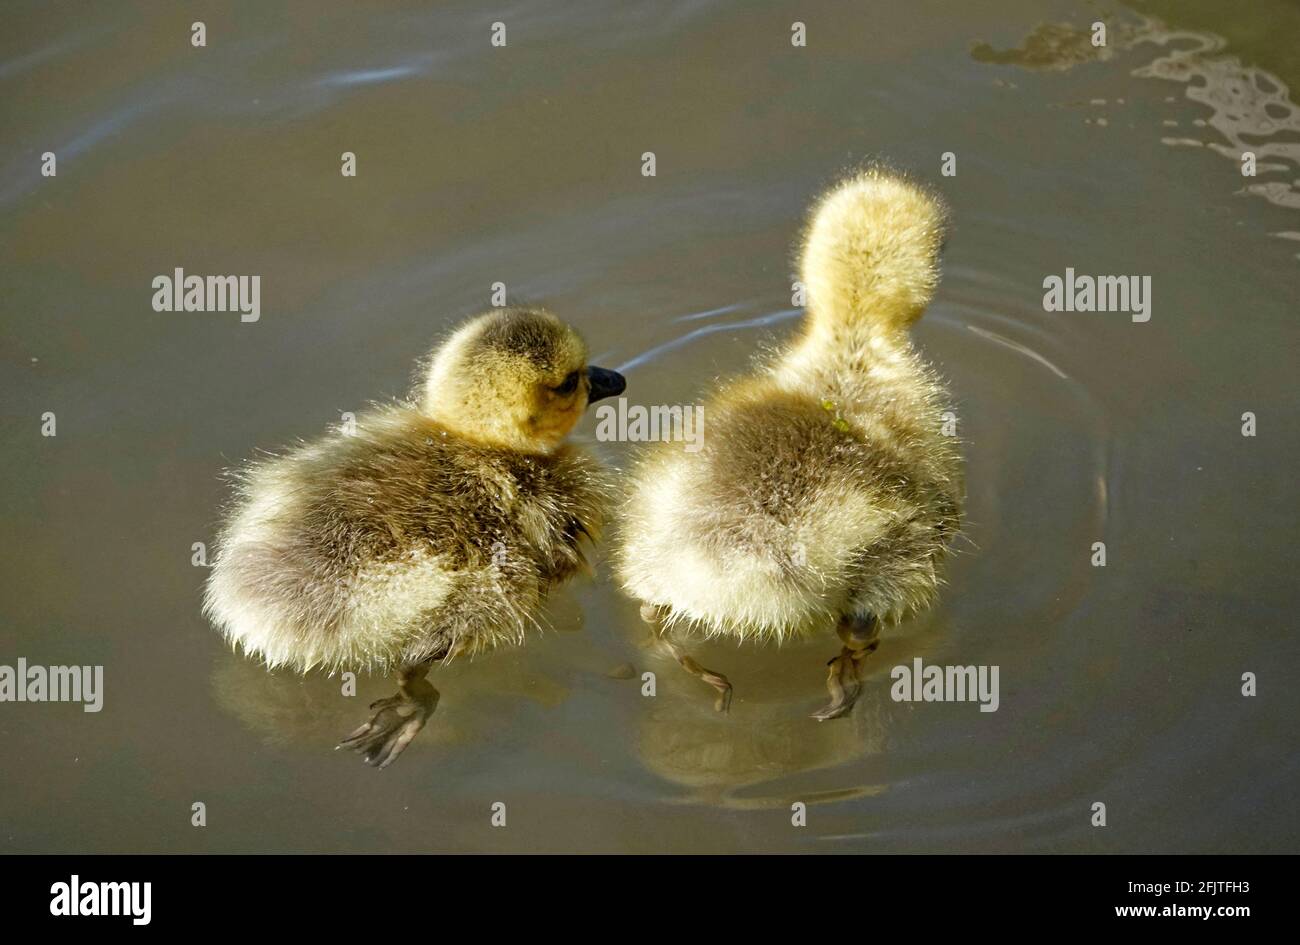 Baby Canada geese or goslings, Branta canadensis, swimming with their mother in April in the Deschutes River, near Bend, Oregon. Stock Photo